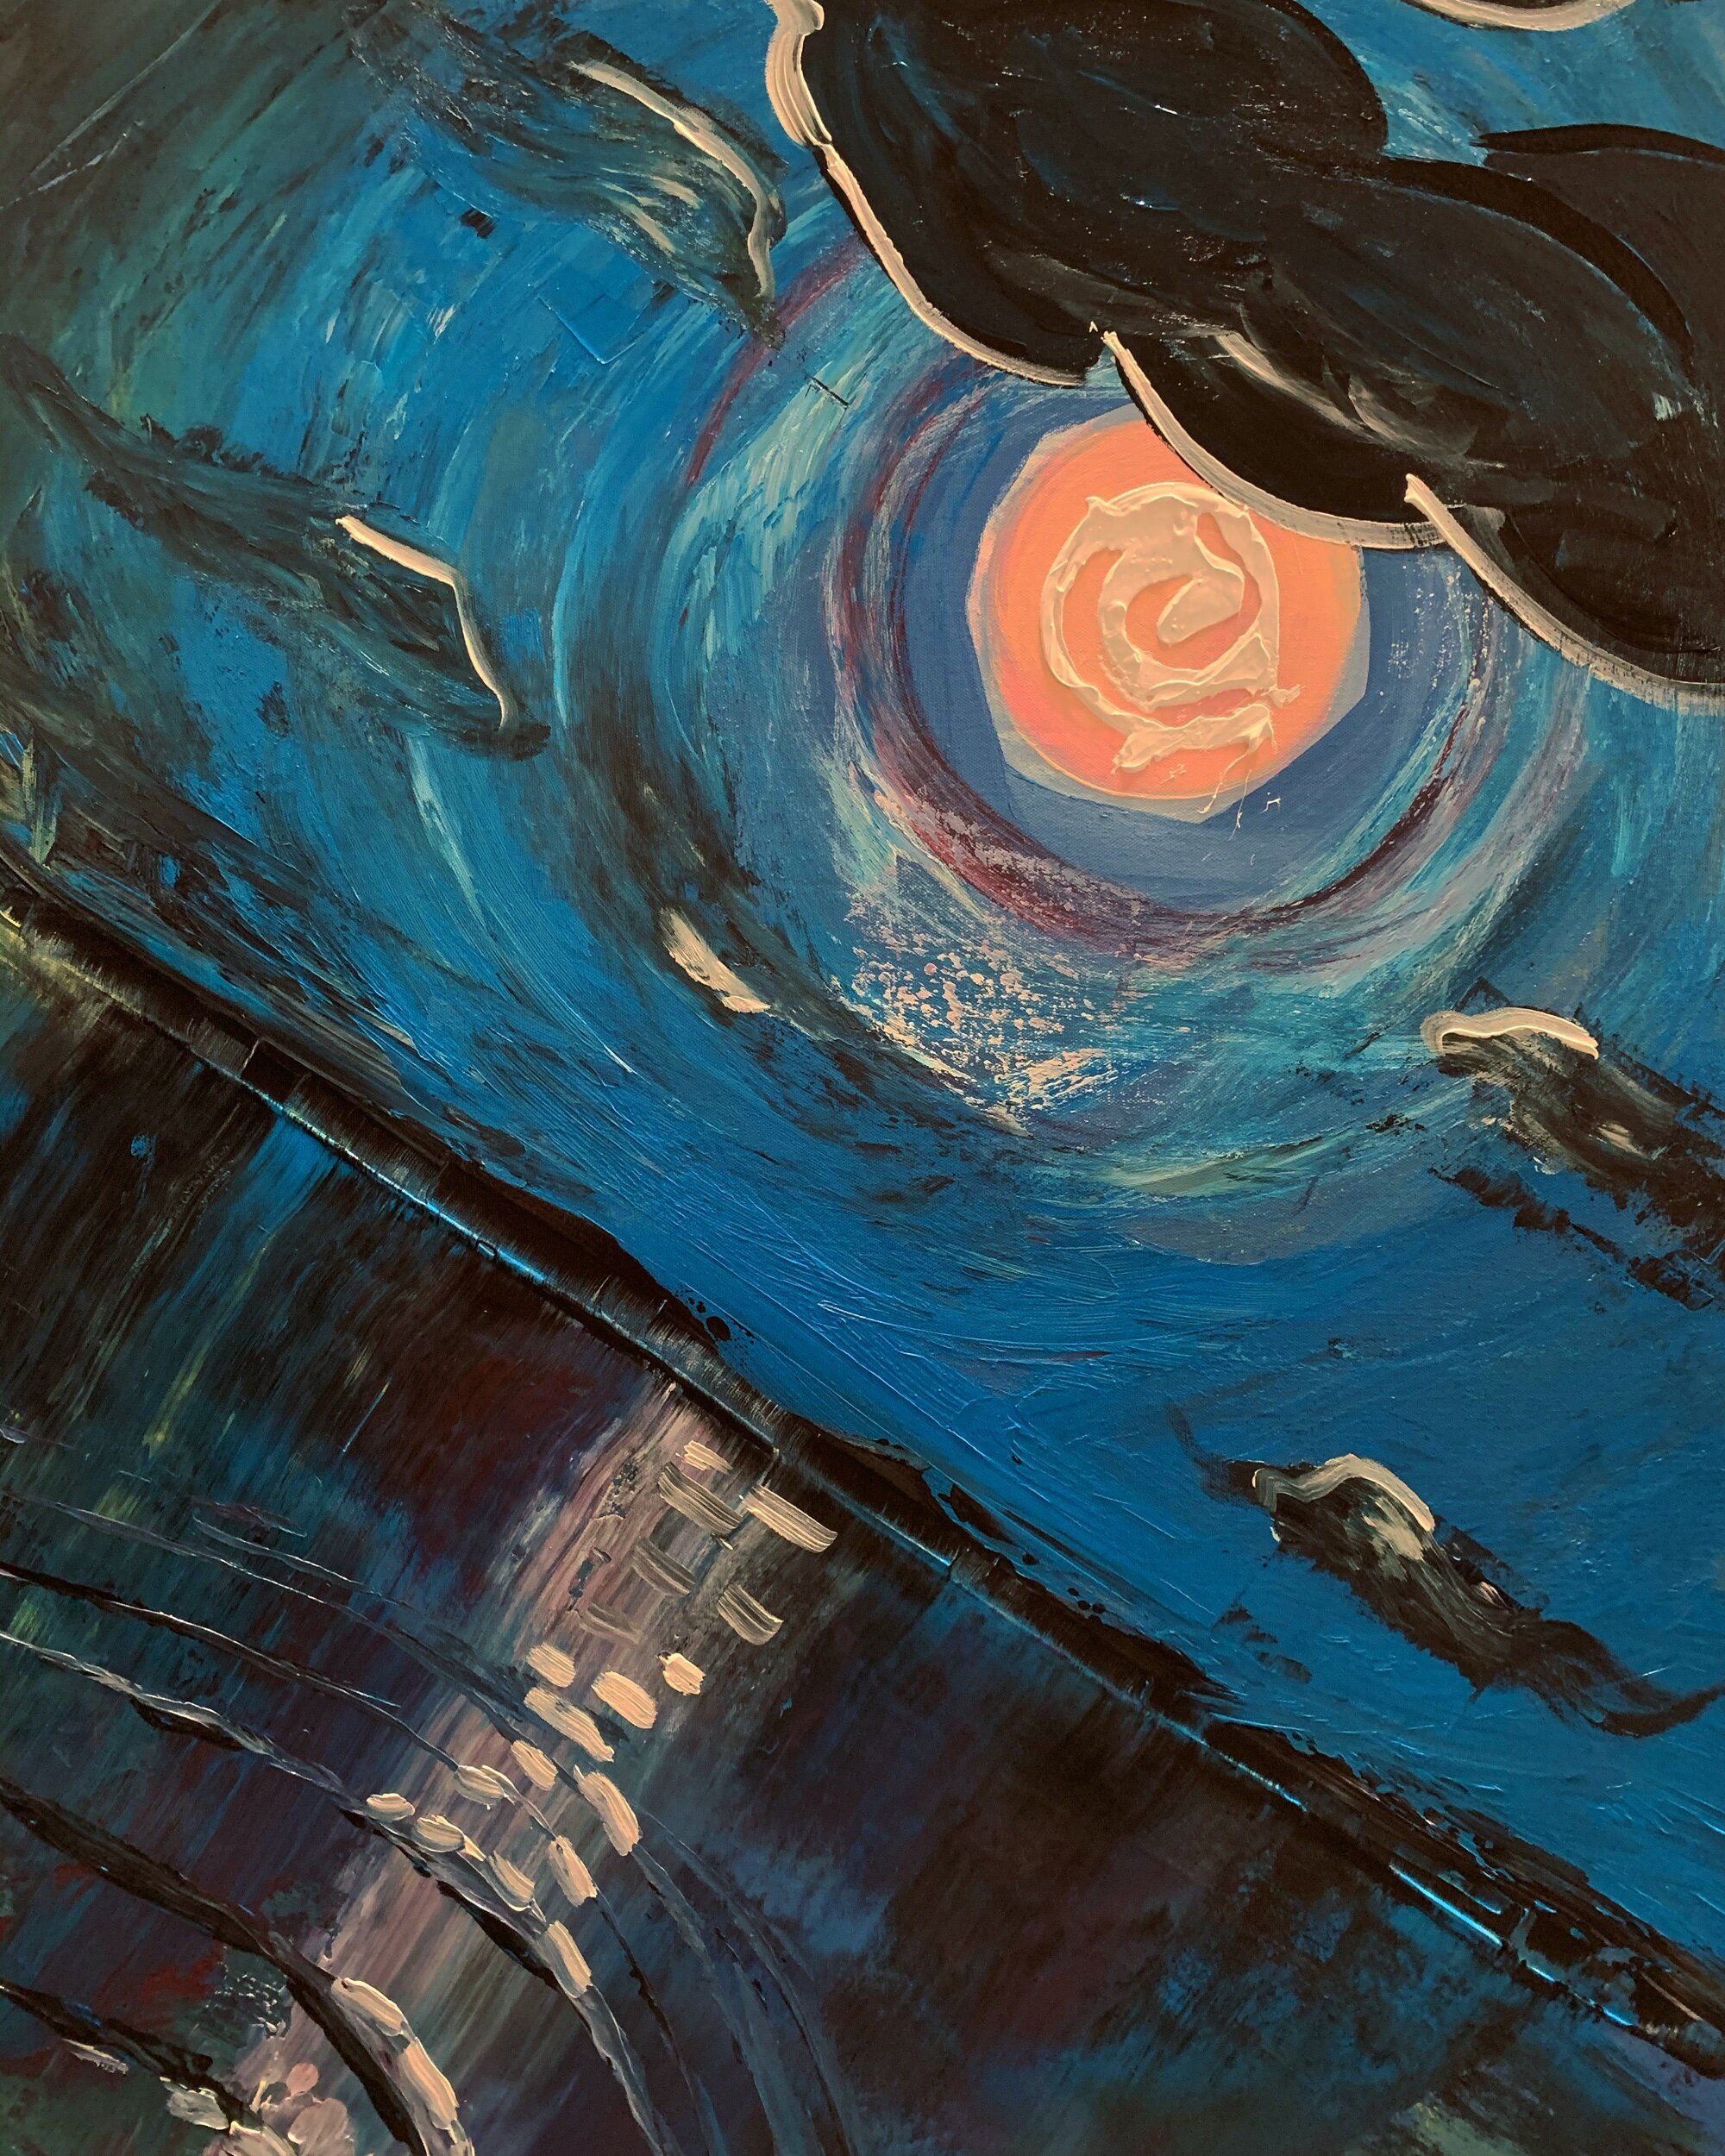 “Lying in a Boat Under a Pink Moon” 30”x40” acrylic on canvas, 2020